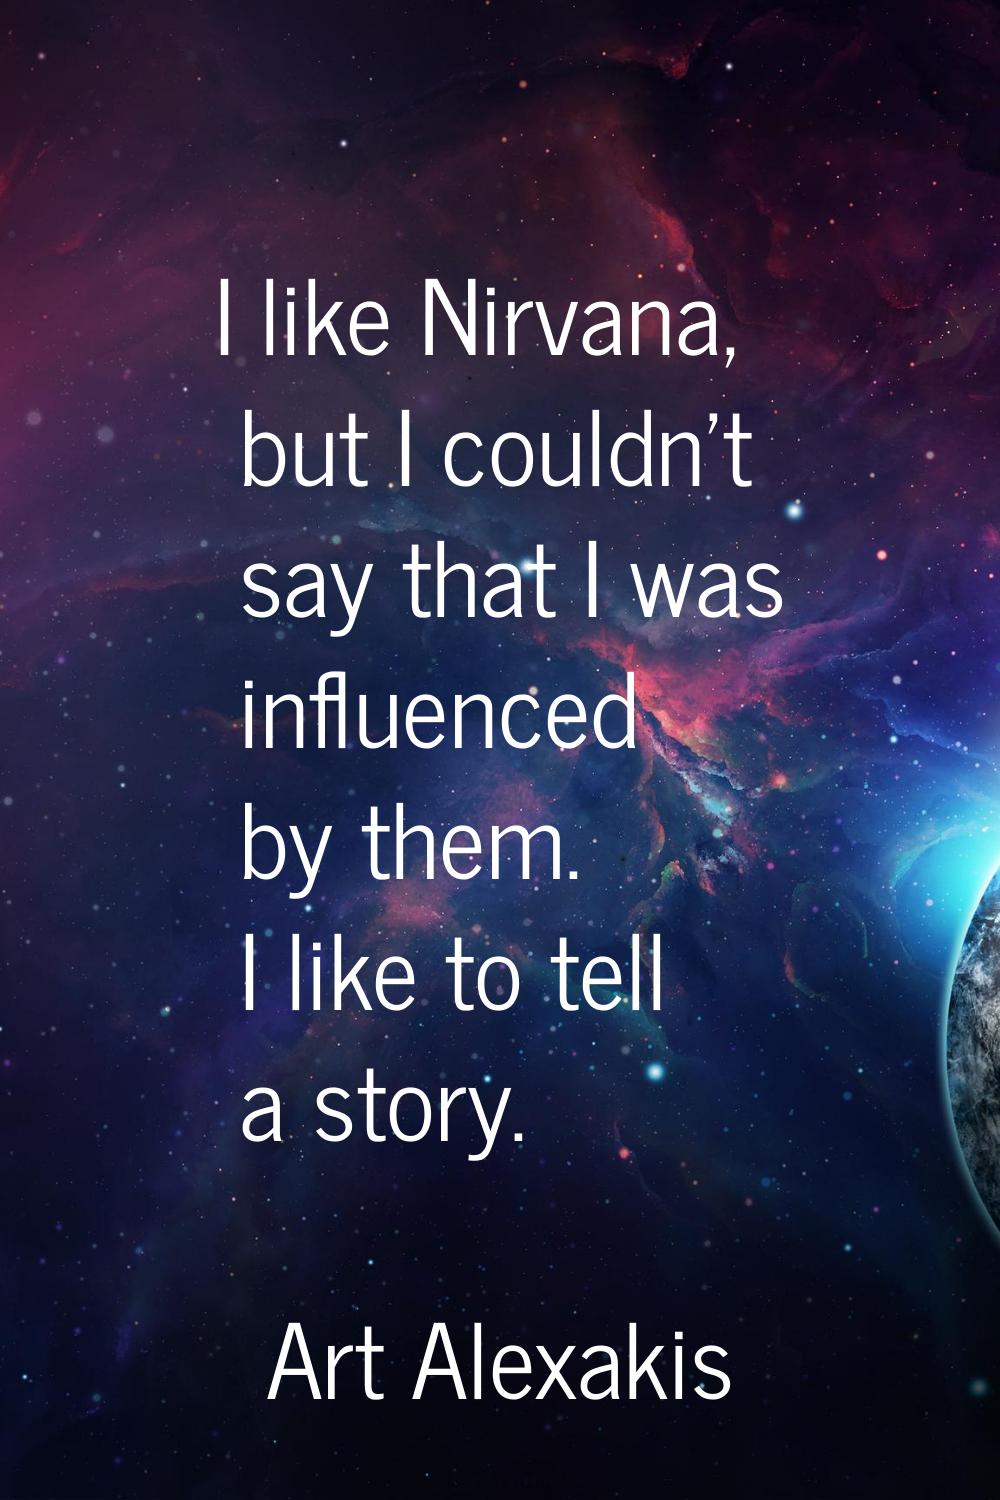 I like Nirvana, but I couldn't say that I was influenced by them. I like to tell a story.